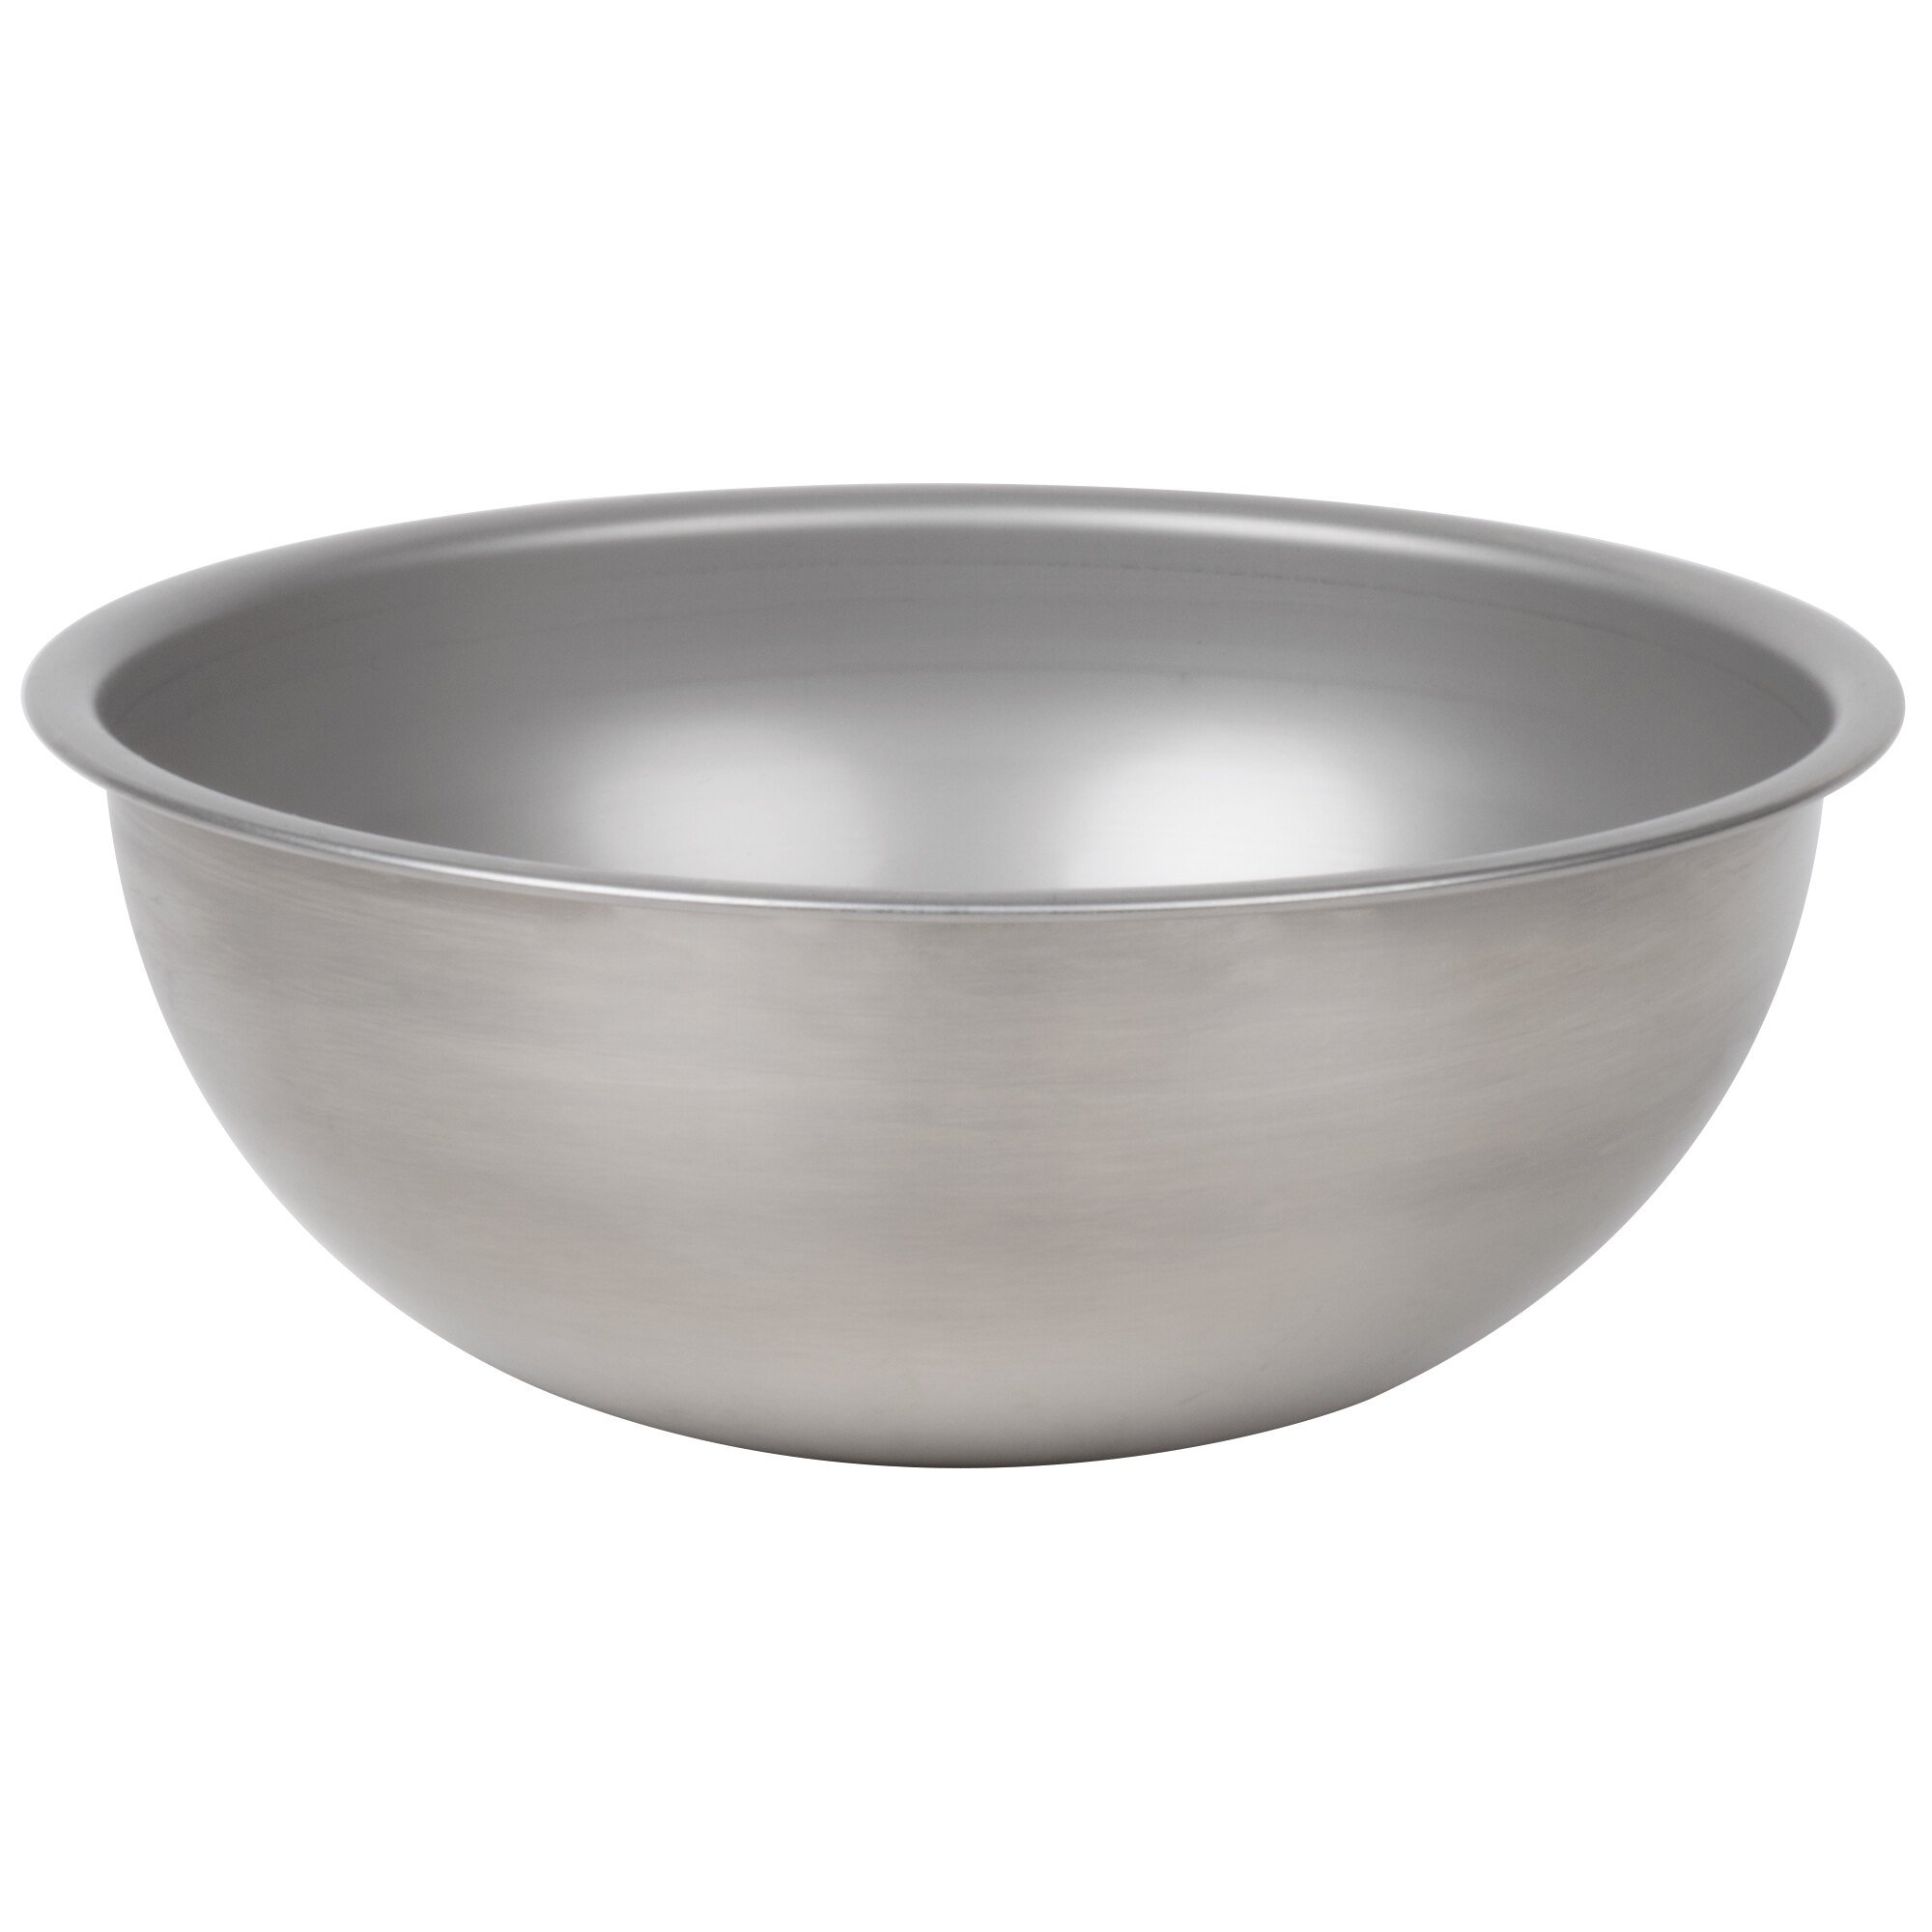 heavy gauge stainless steel mixing bowls